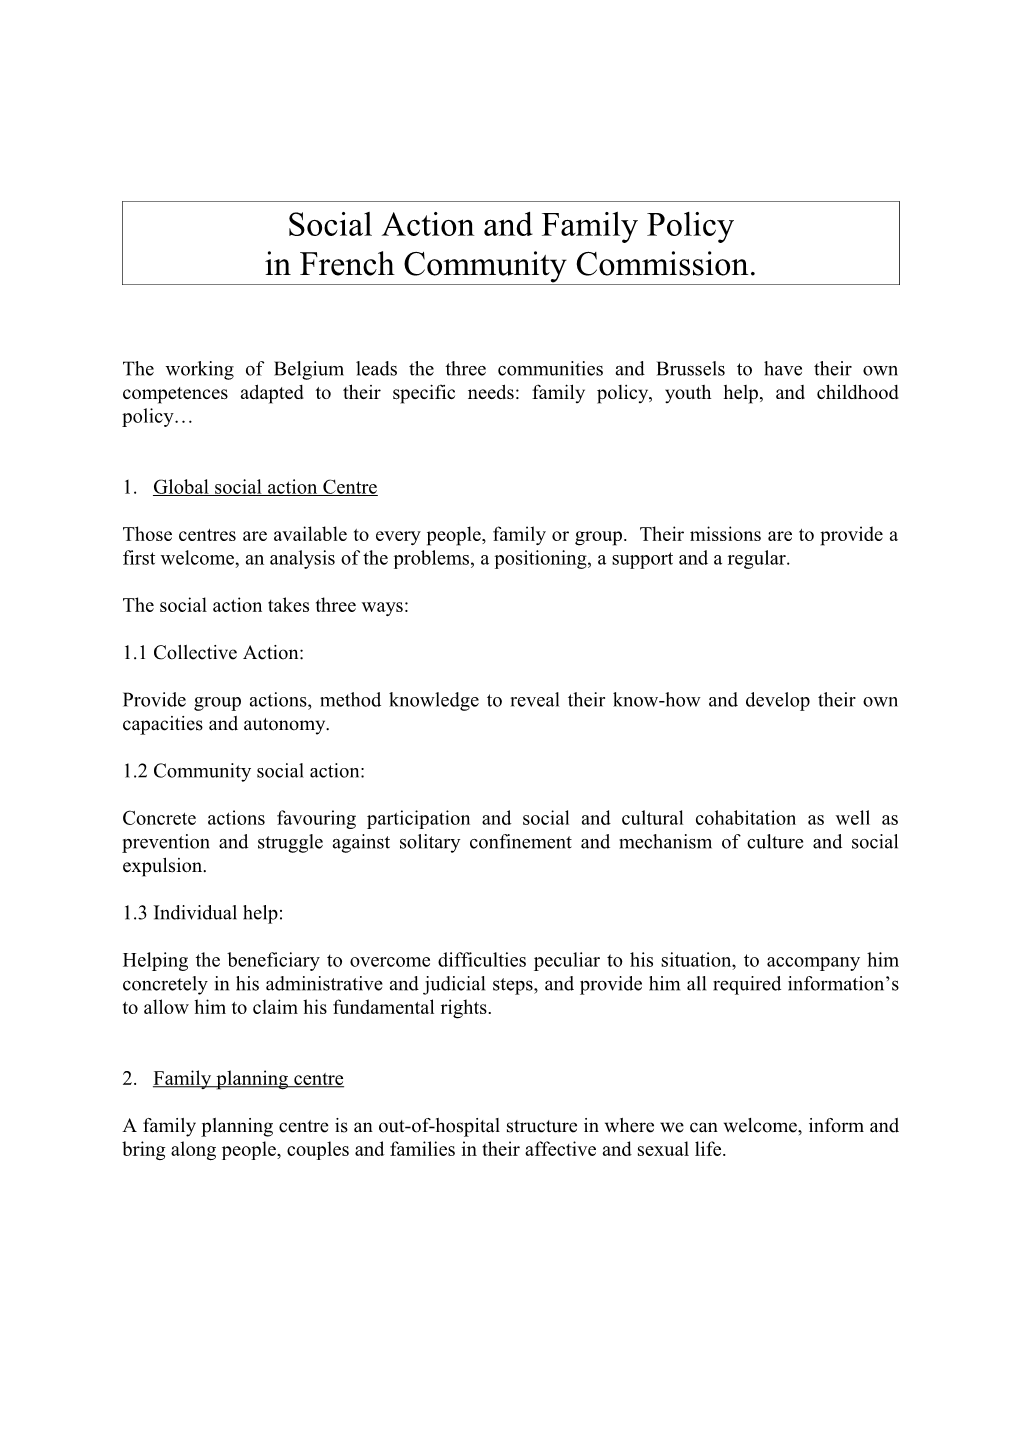 Social Action and Family Policy in French Community Commission